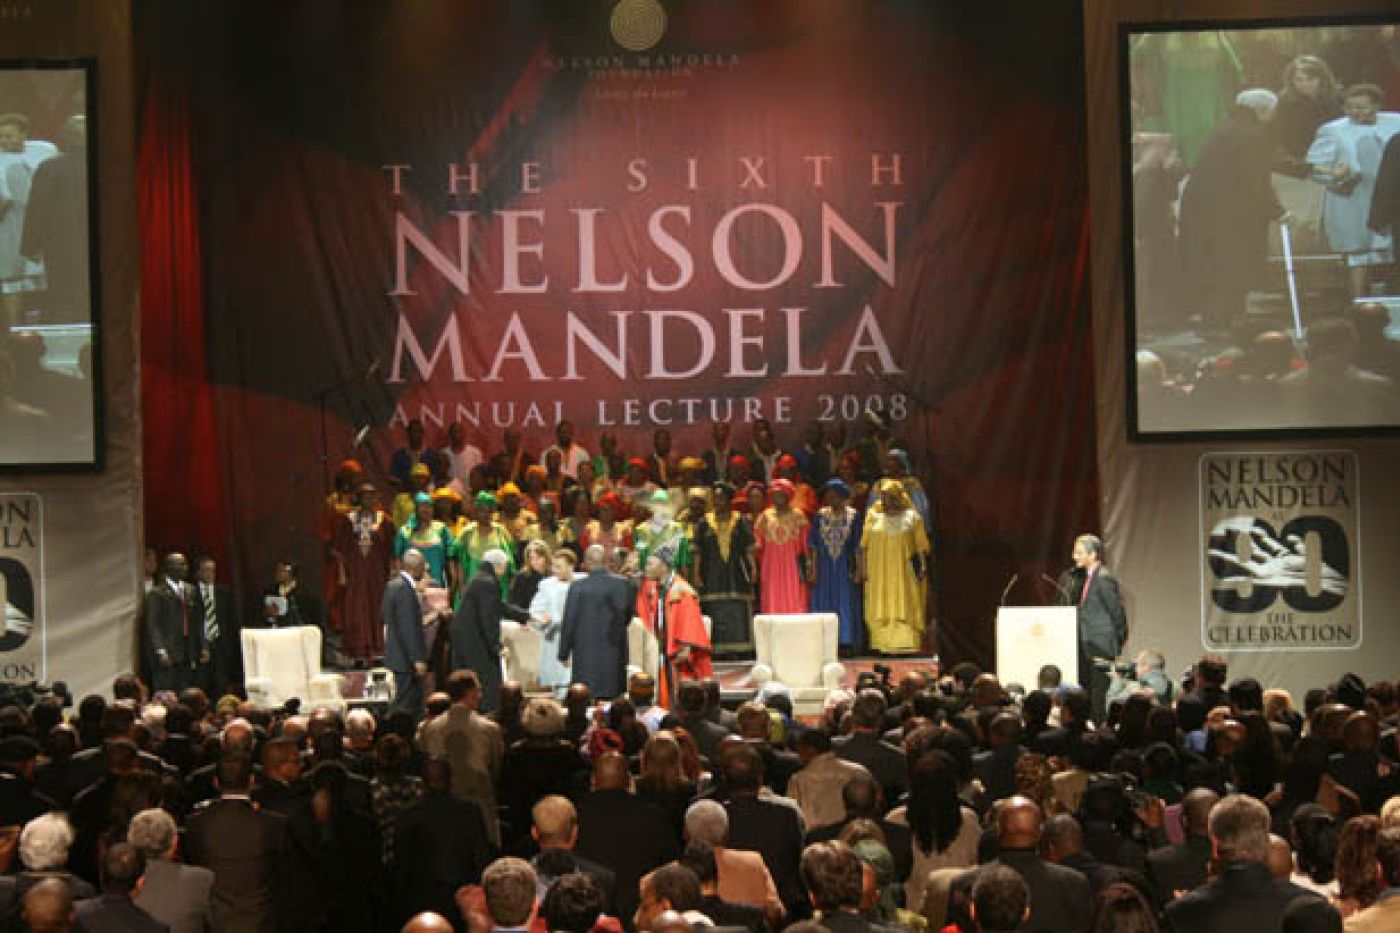 Sixth Nelson Mandela Annual Lecture